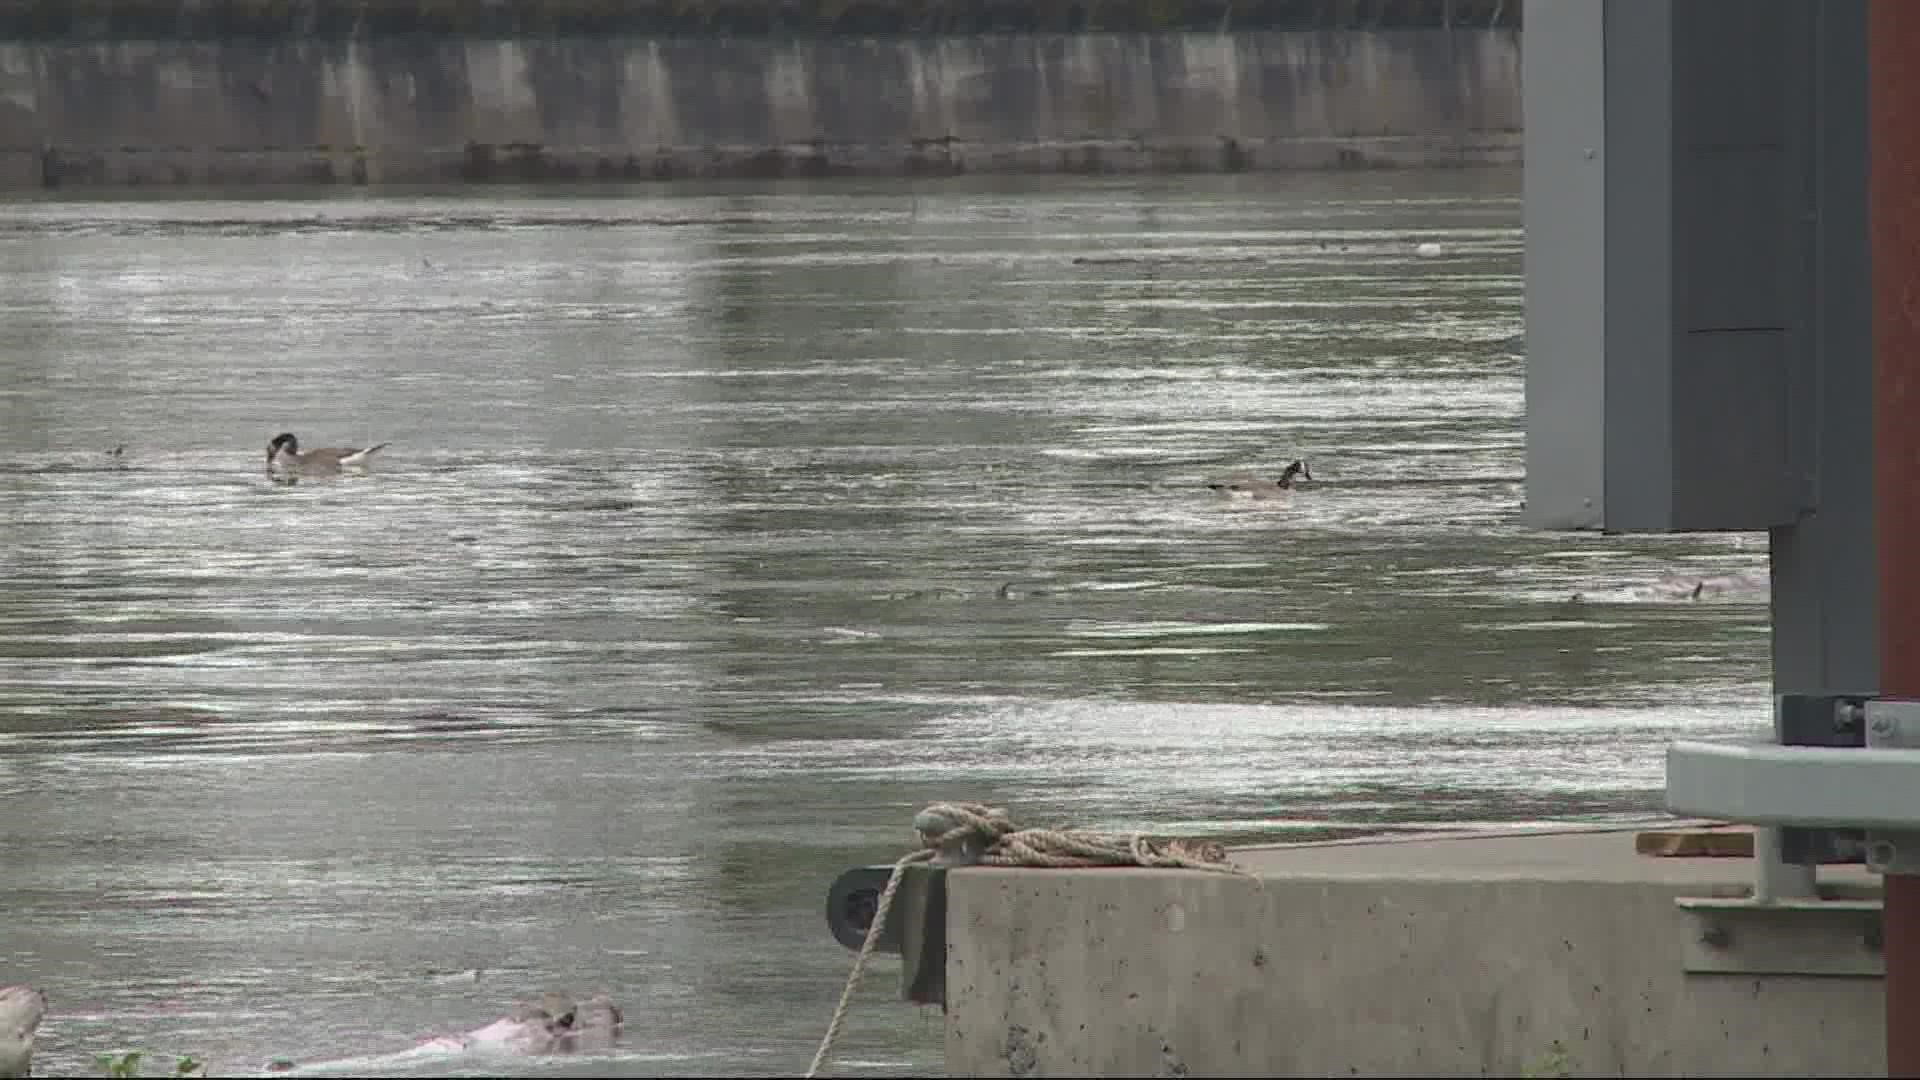 Part of the popular Eastbank Esplanade in Portland closed Sunday until further notice due to rising river levels, Portland Parks & Recreation said.